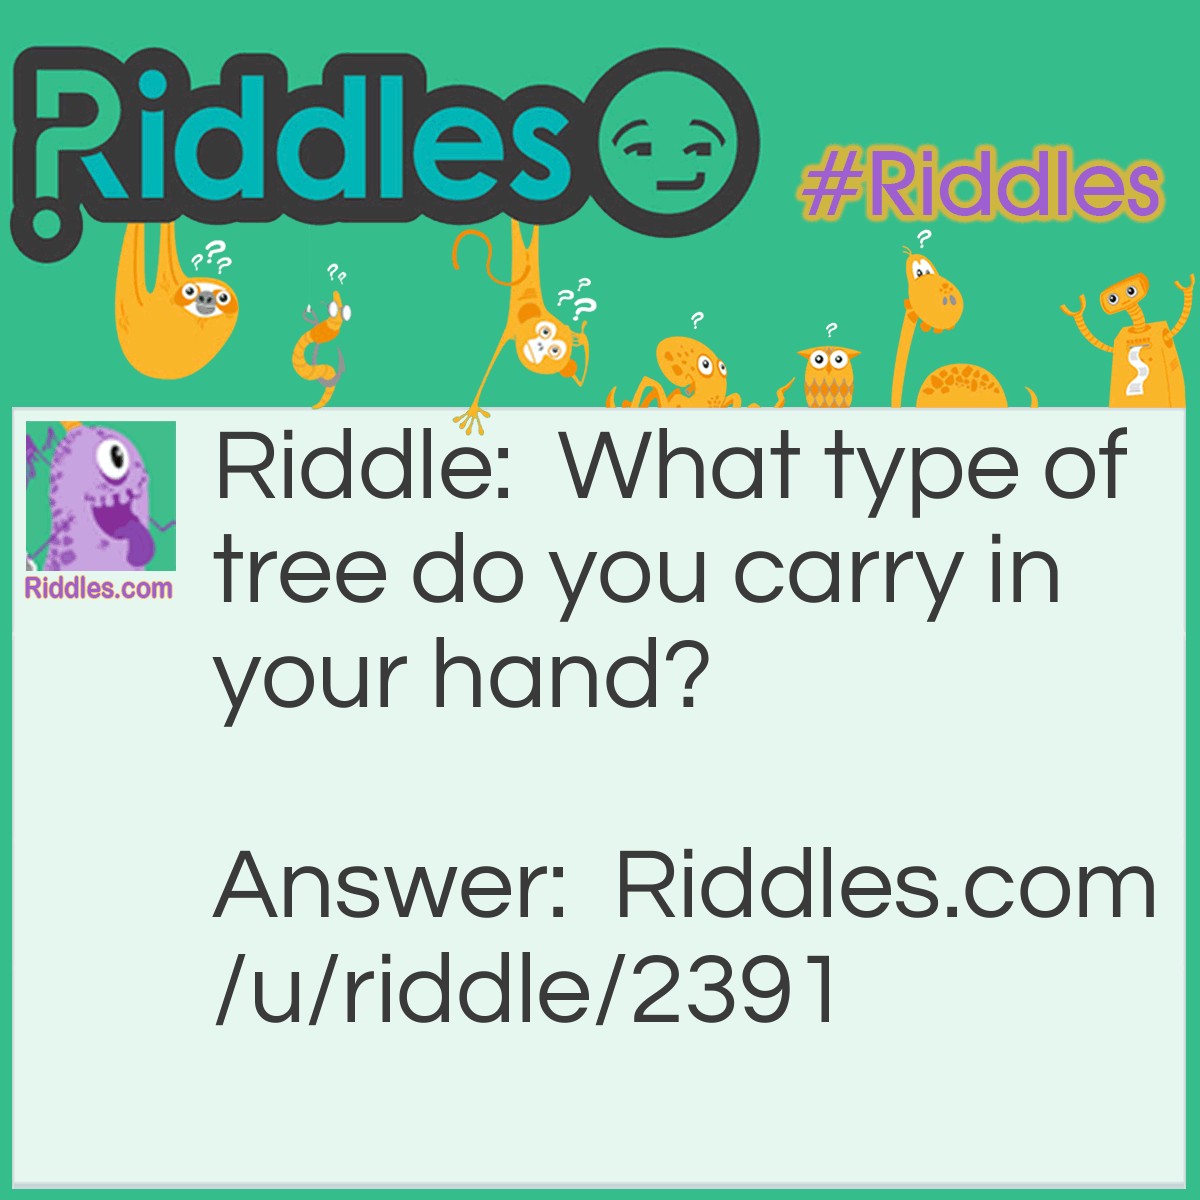 Riddle: What type of tree do you carry in your hand? Answer: A palm tree.